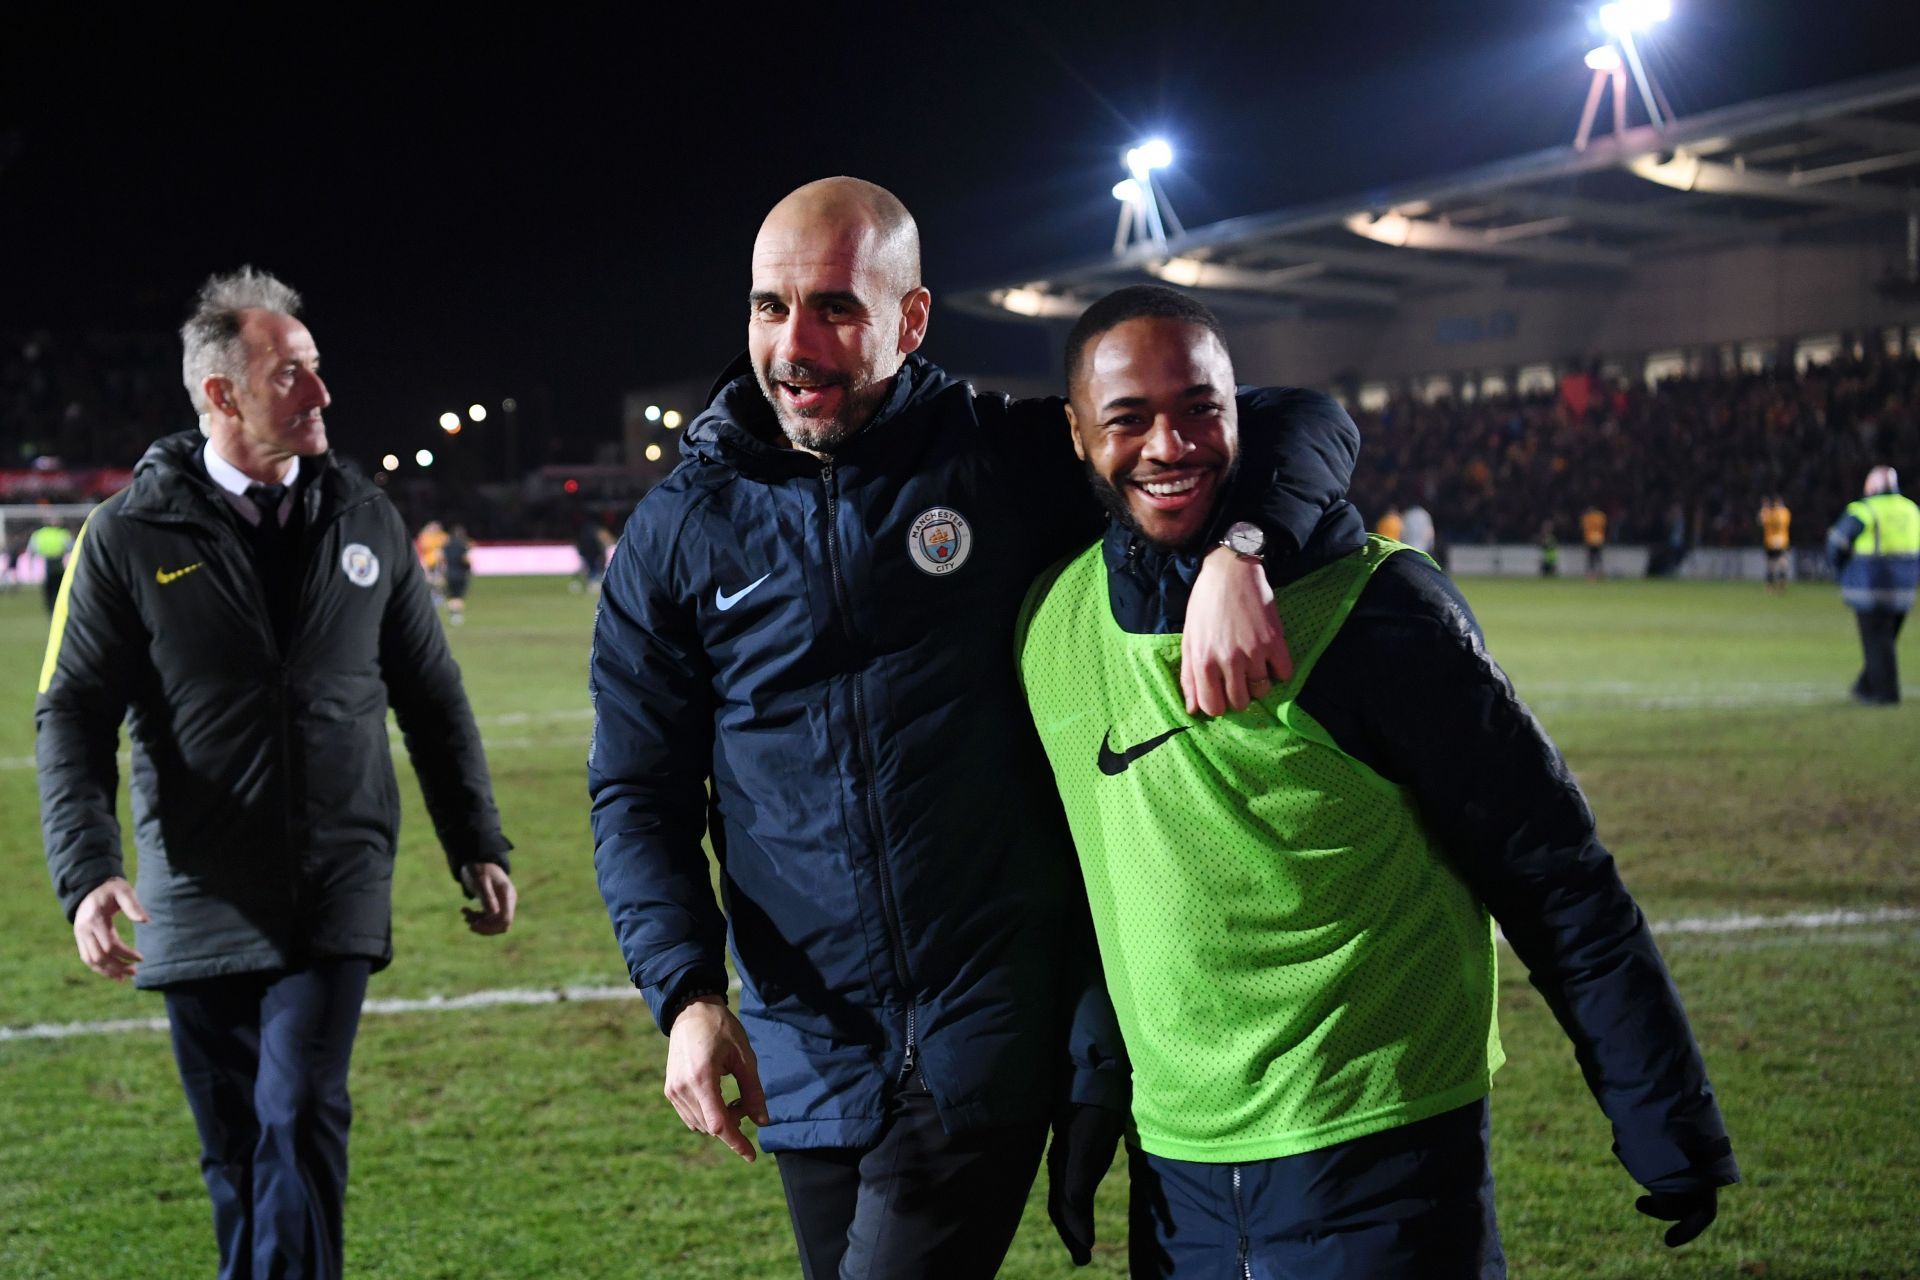 Guardiola showered praise on Sterling earlier this season